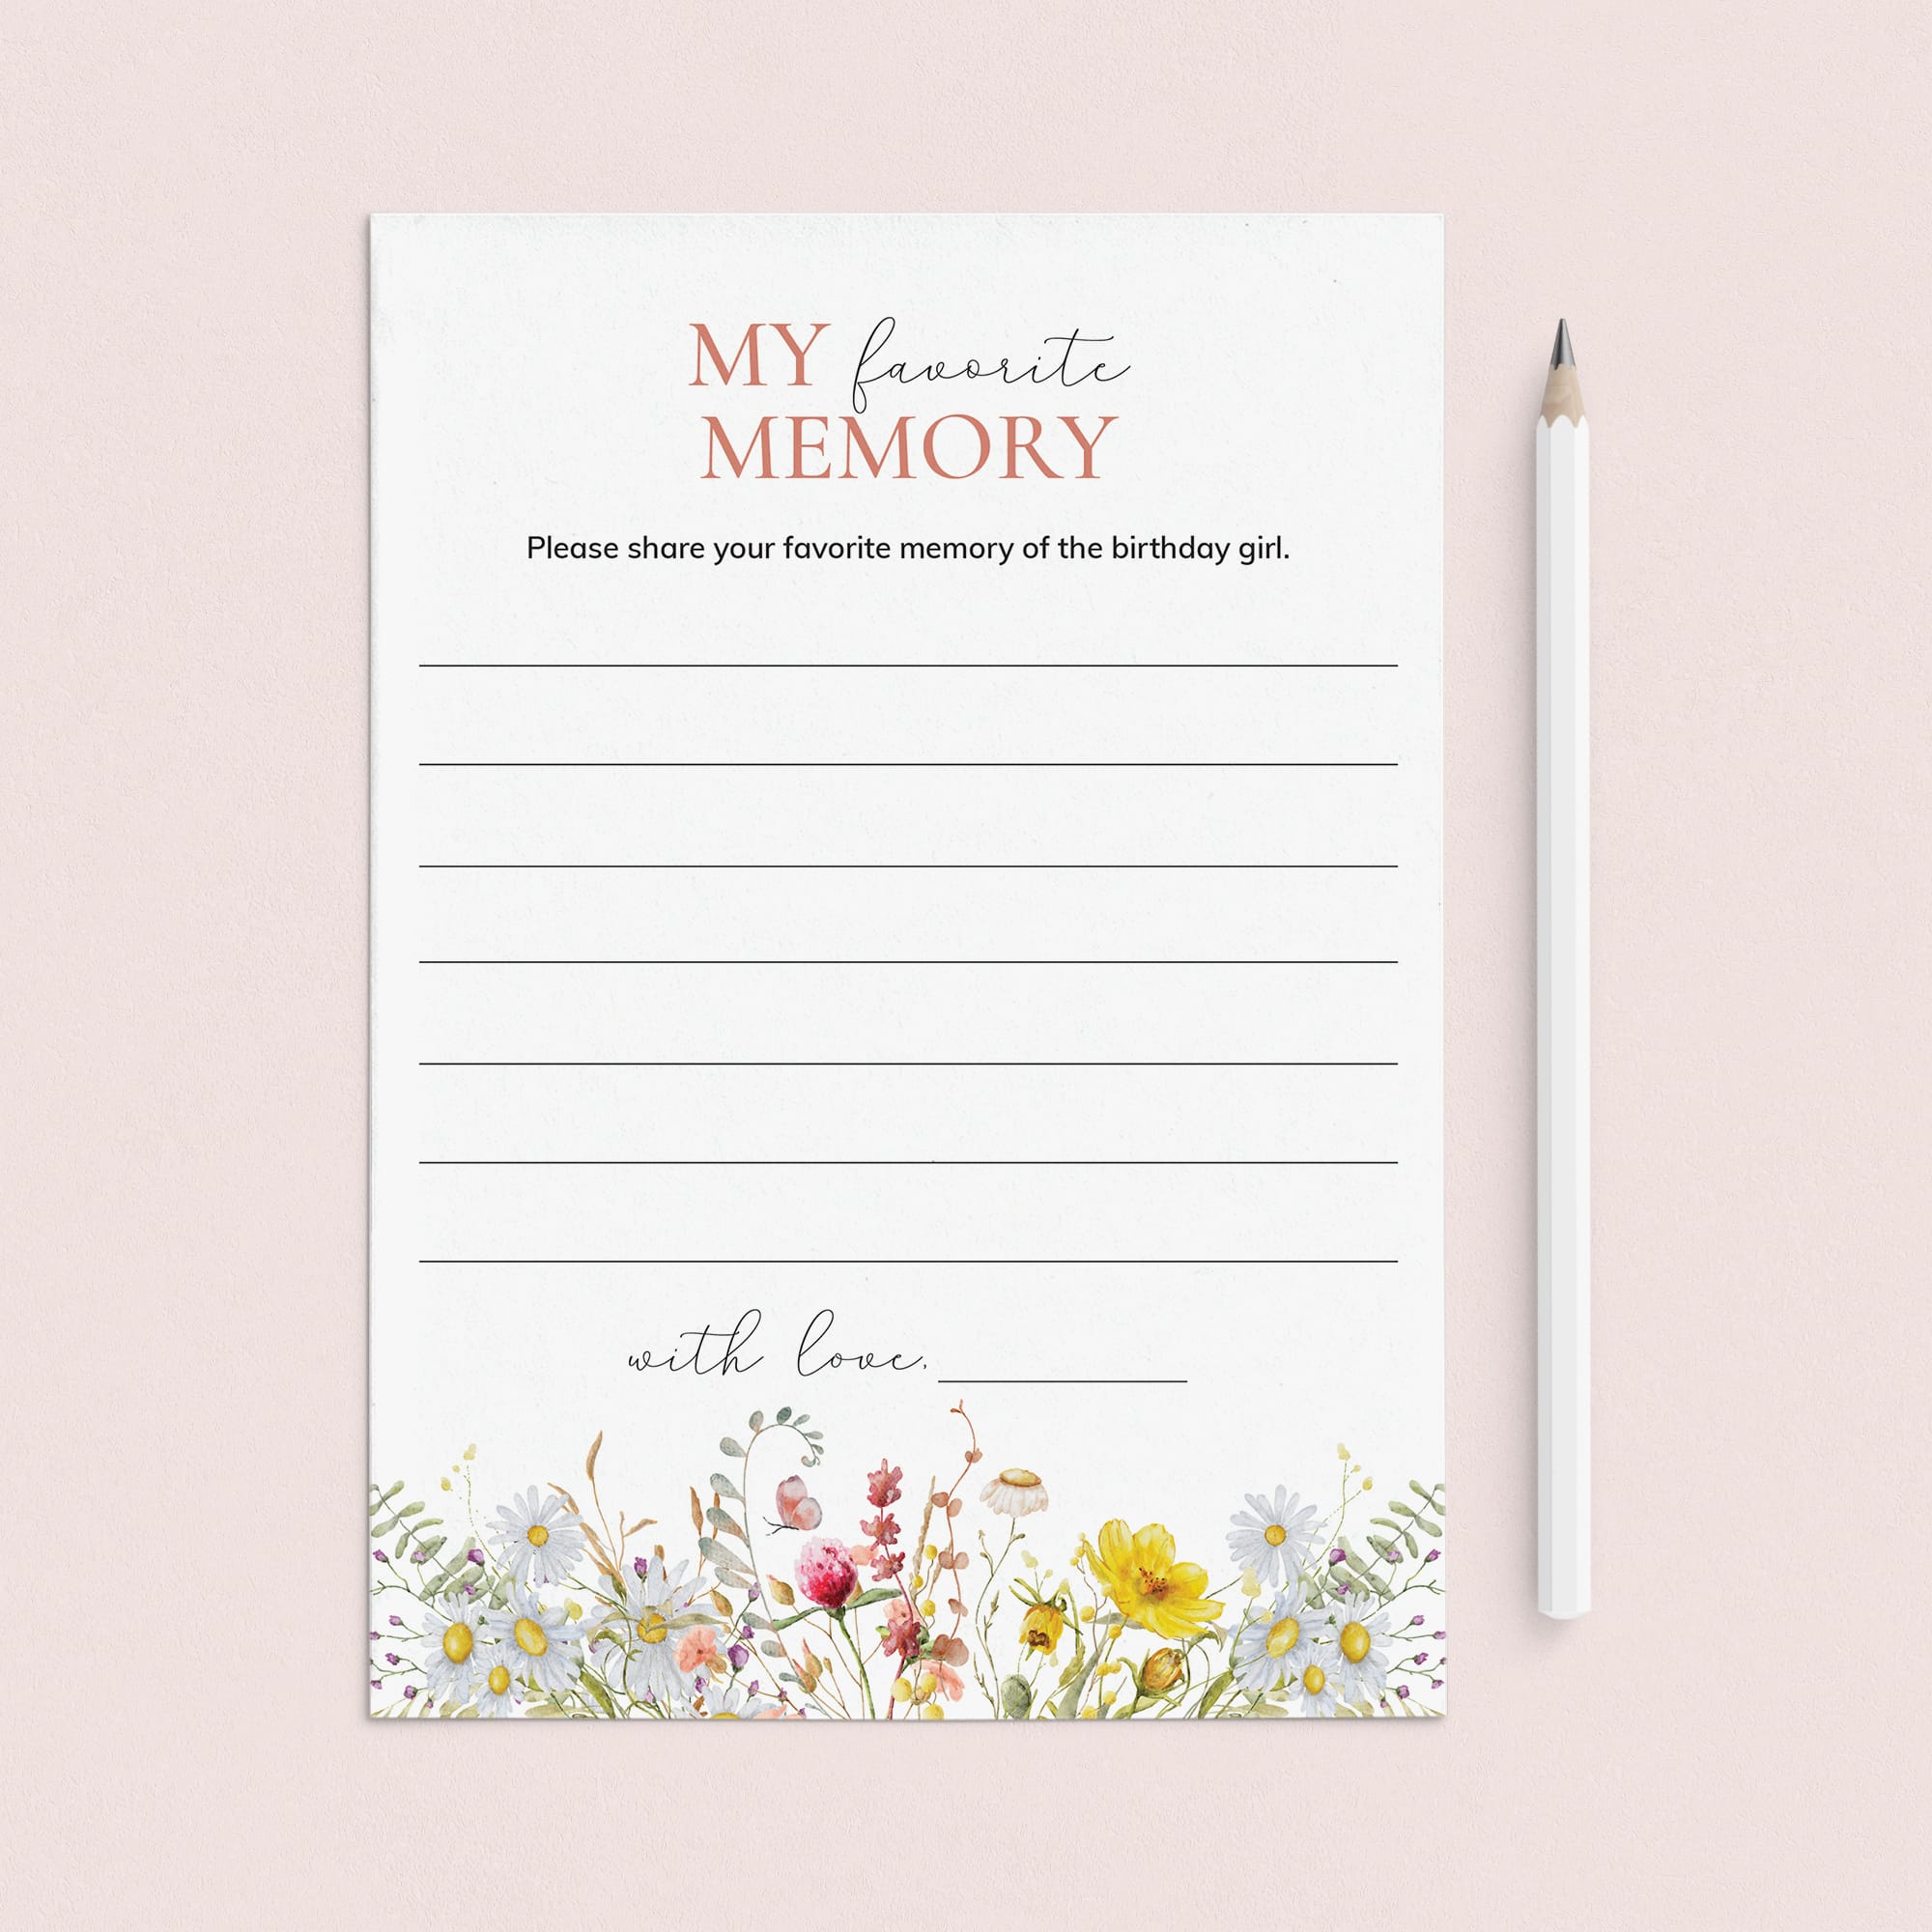 Wildflower Birthday Party Favorite Memory Cards Printable by LittleSizzle